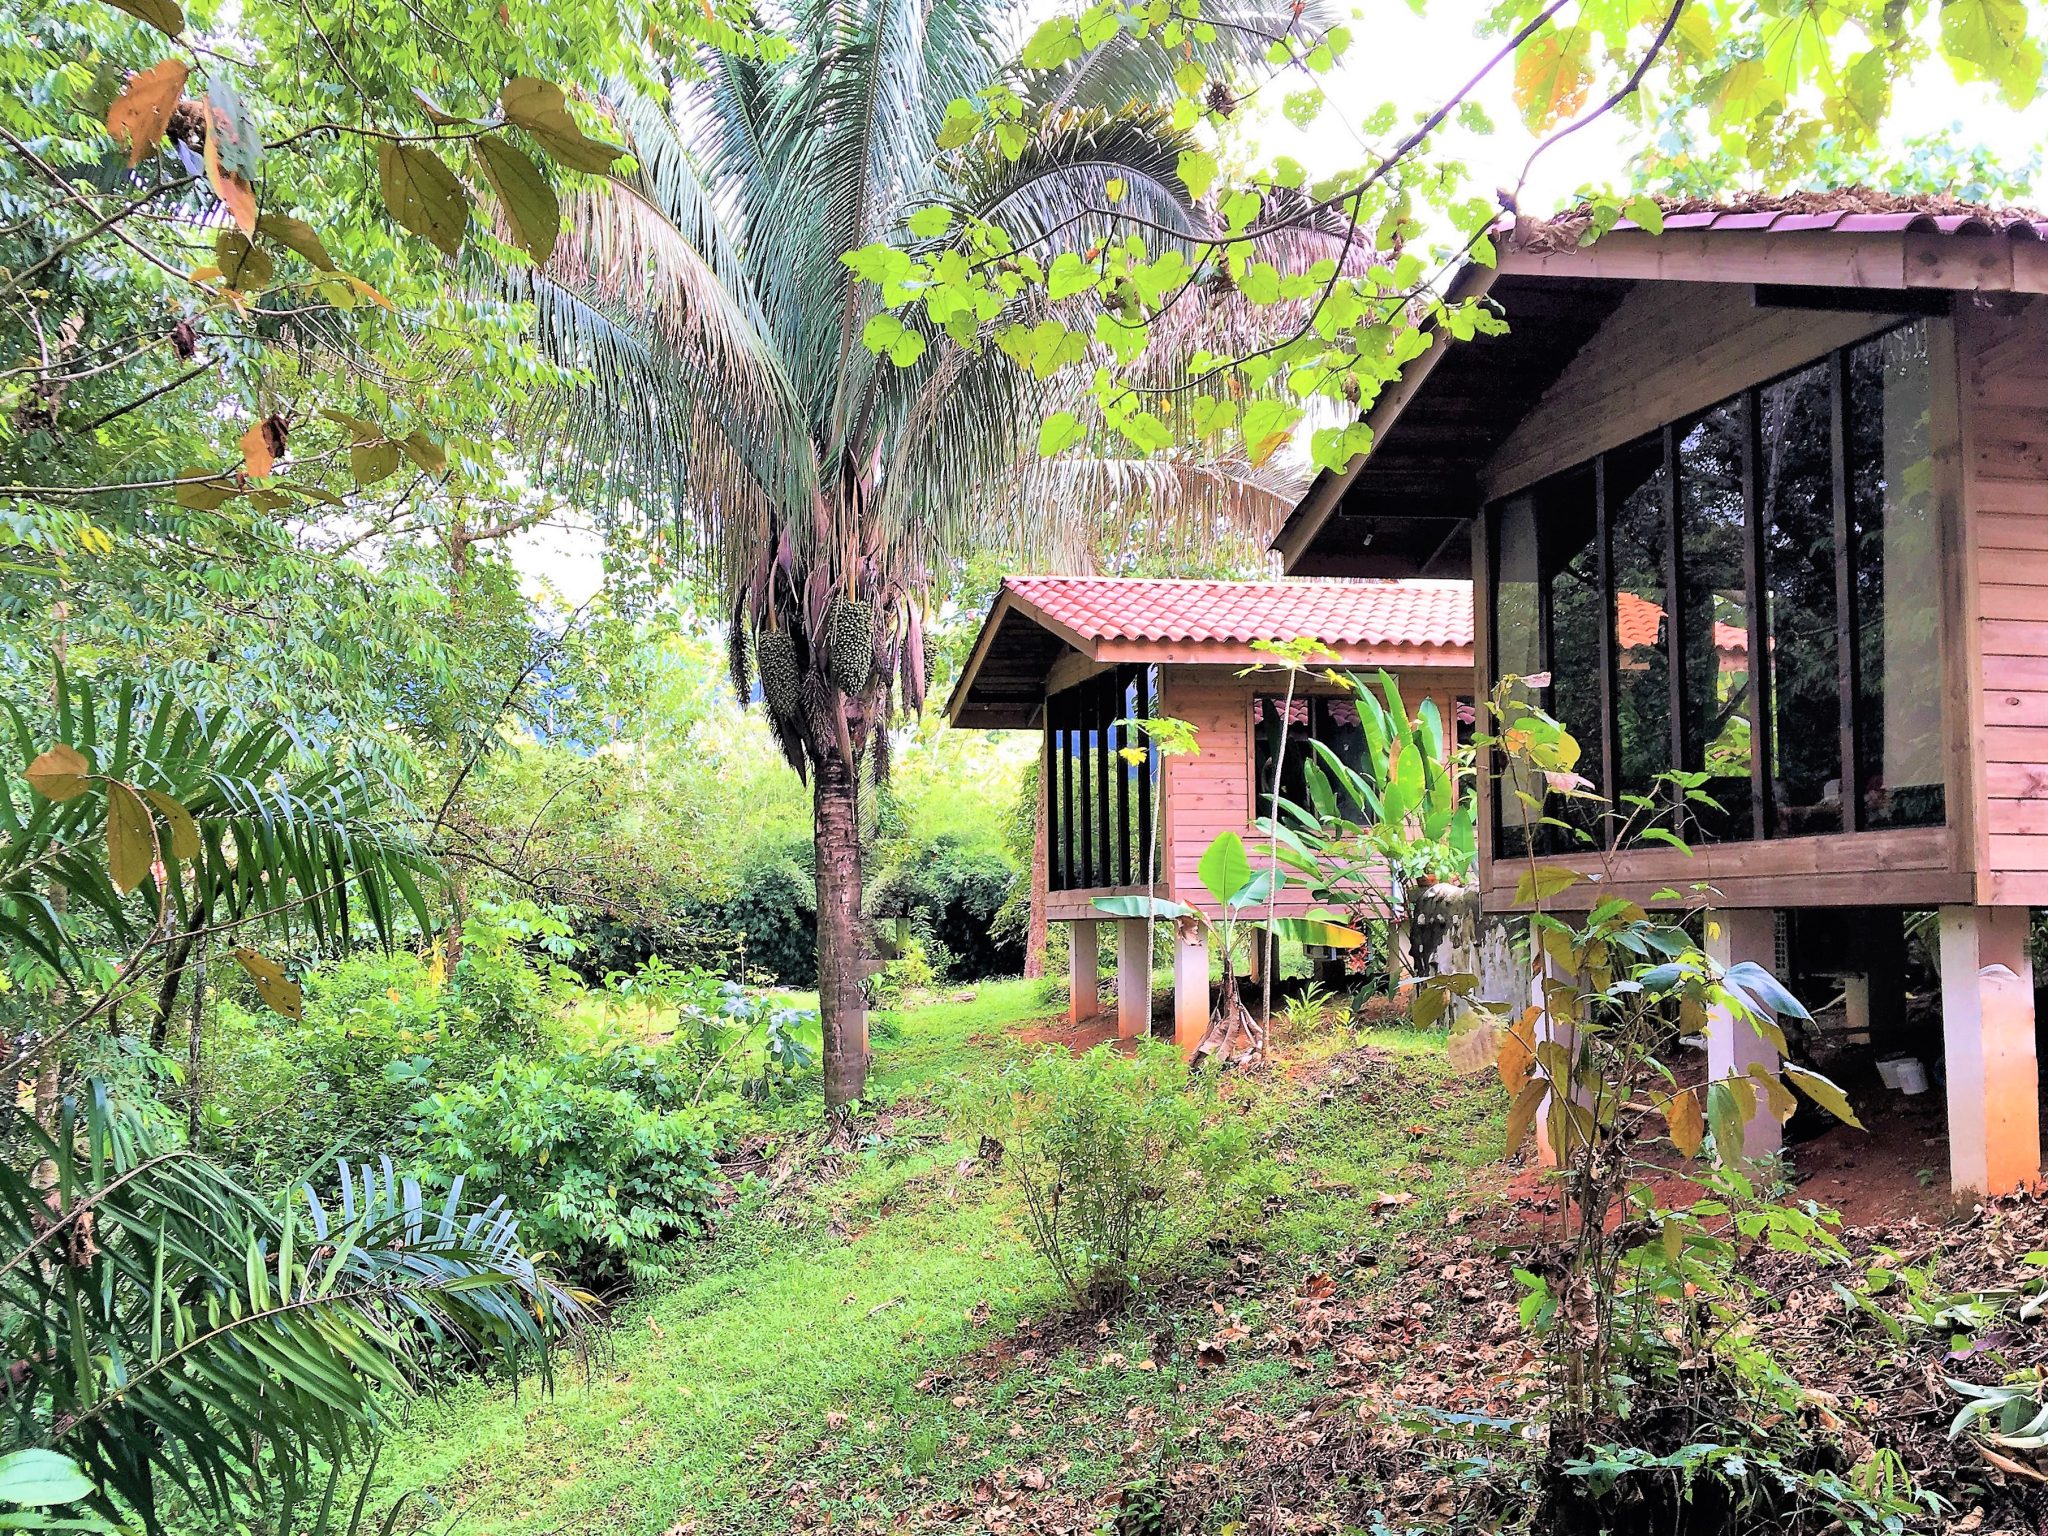 1.5 ACRES - 3 Bedroom Wooden Home With Pool On Beautiful Jungle Lot!!!!